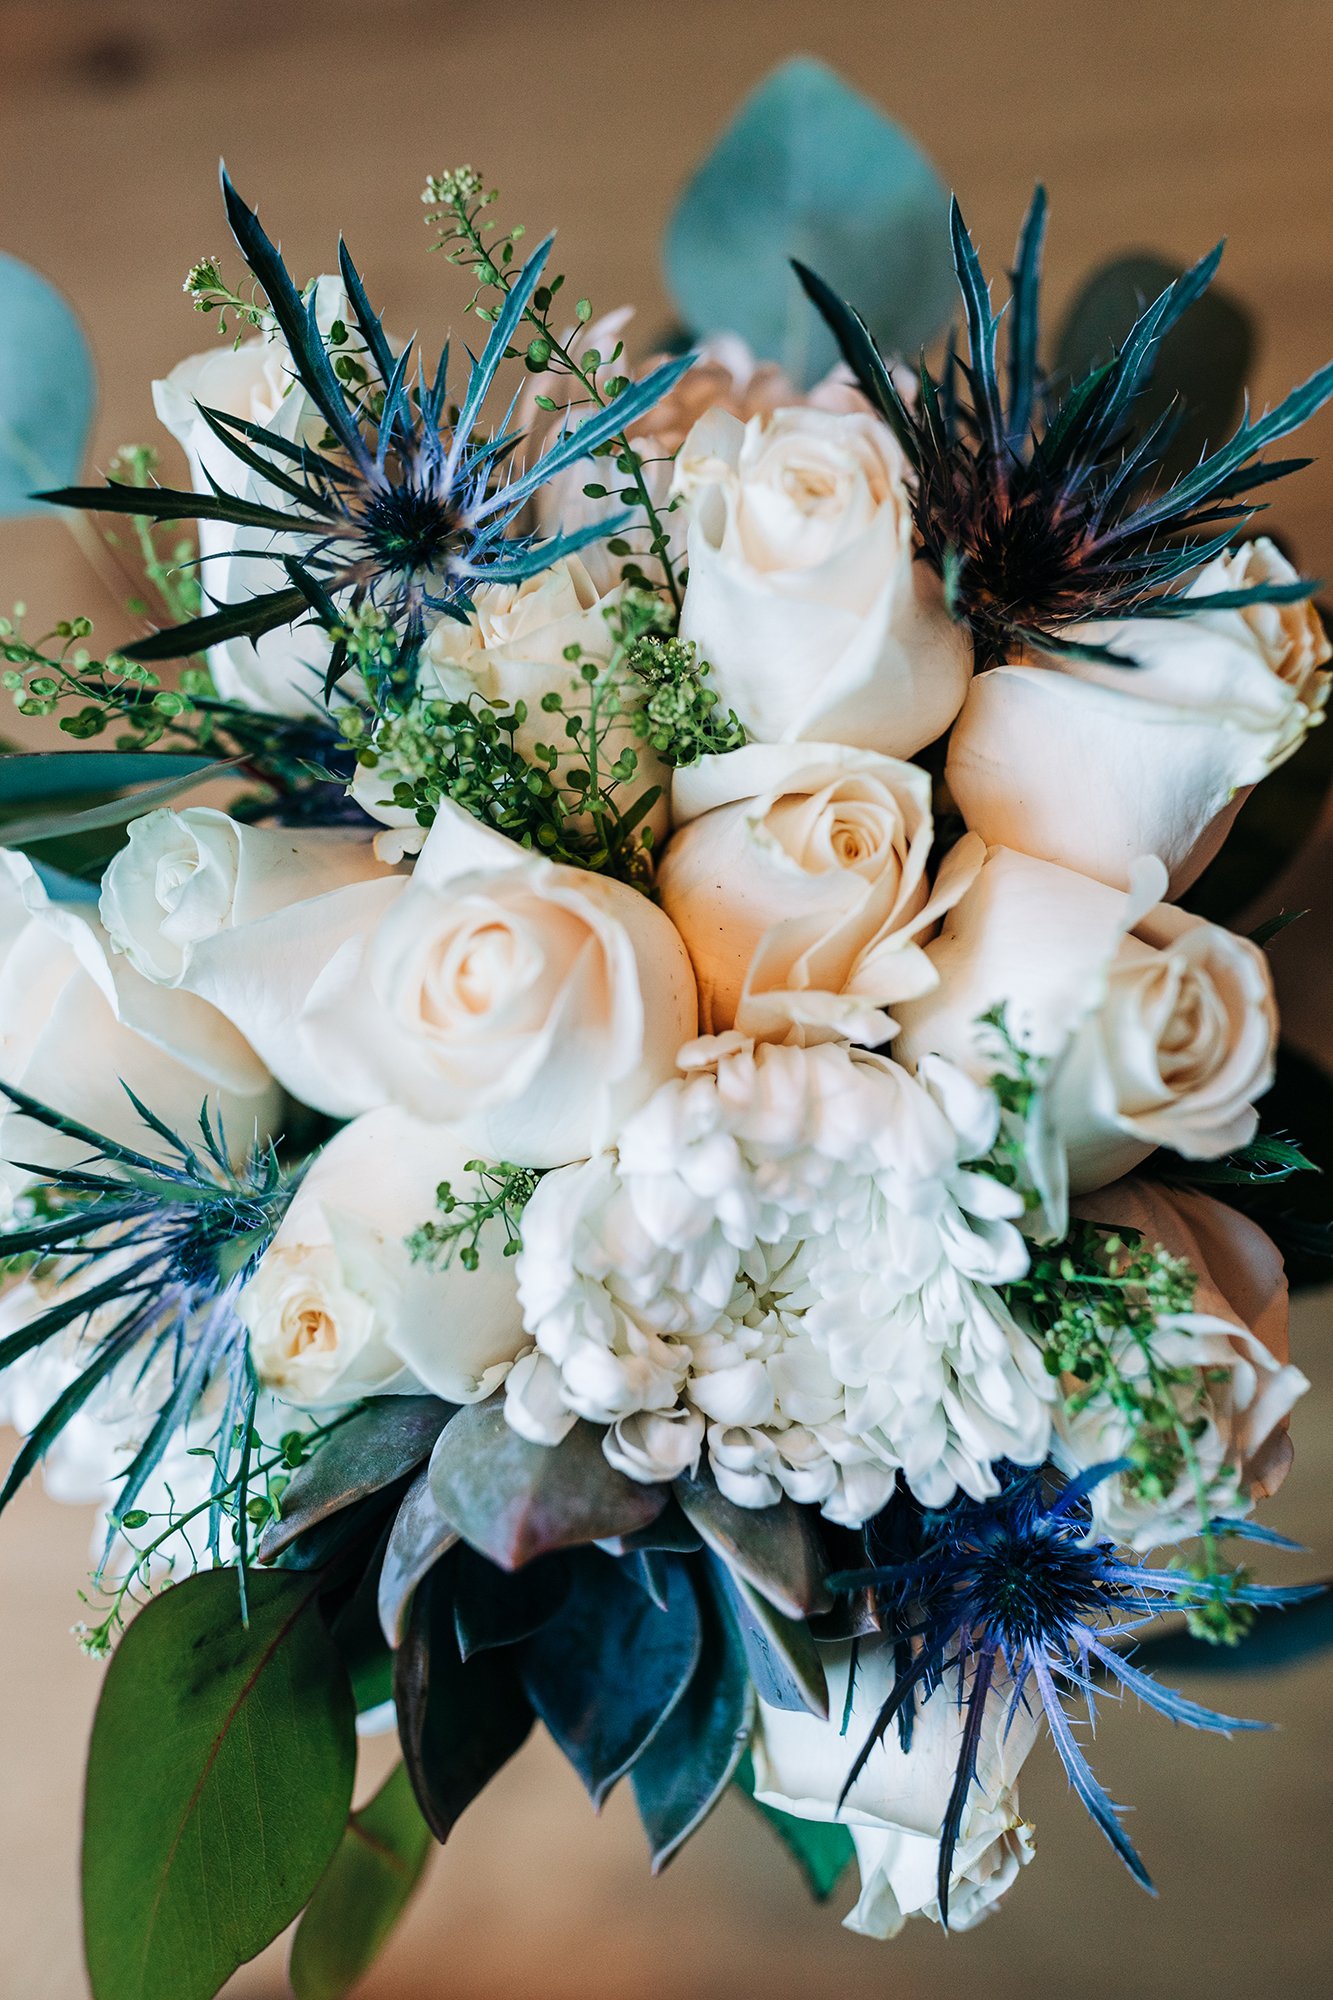 A white, green, and blue wedding bouquet.